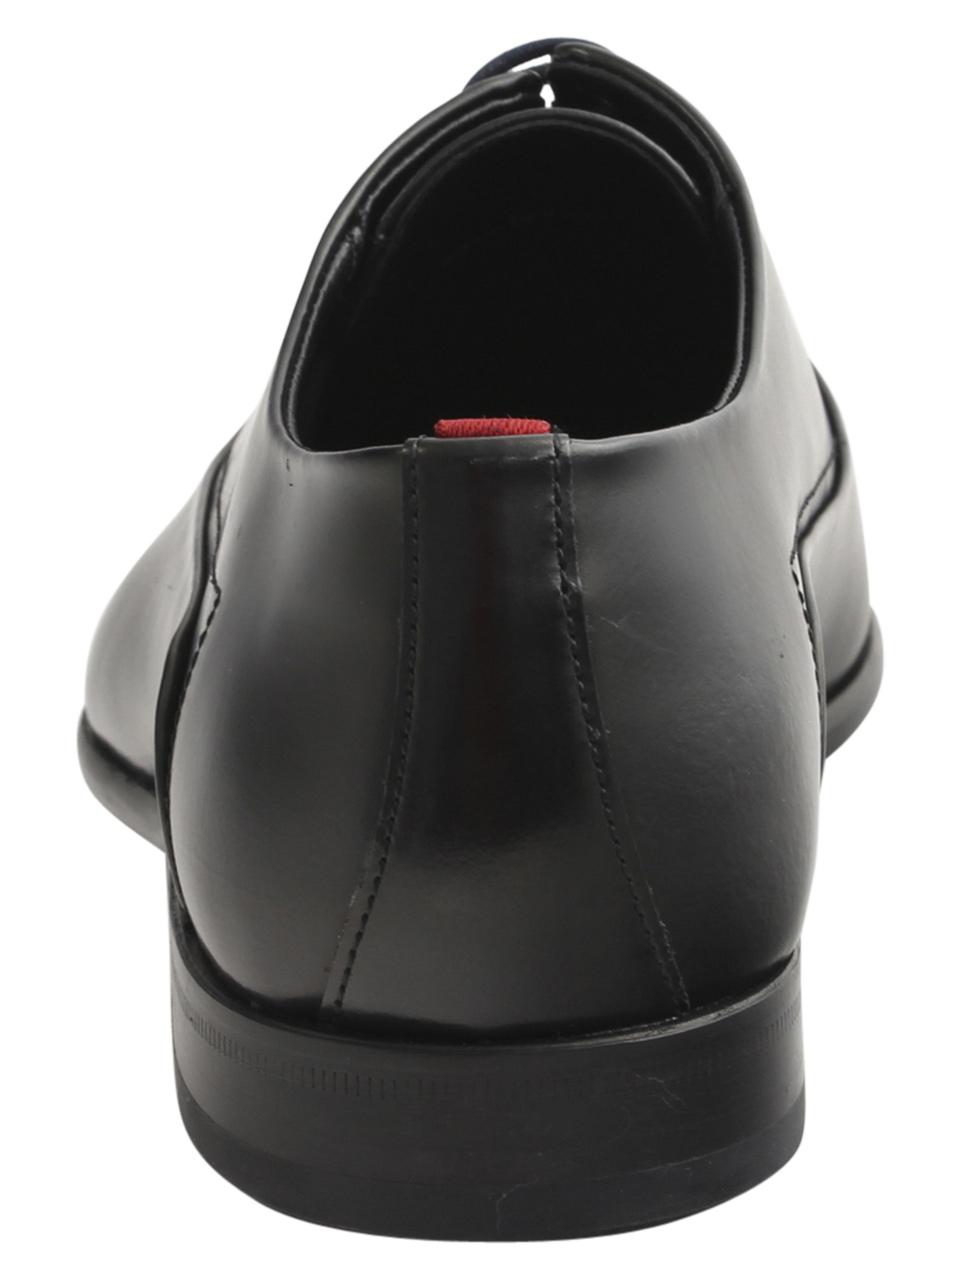 Hugo Boss Mens Appeal Leather Oxfords Shoes